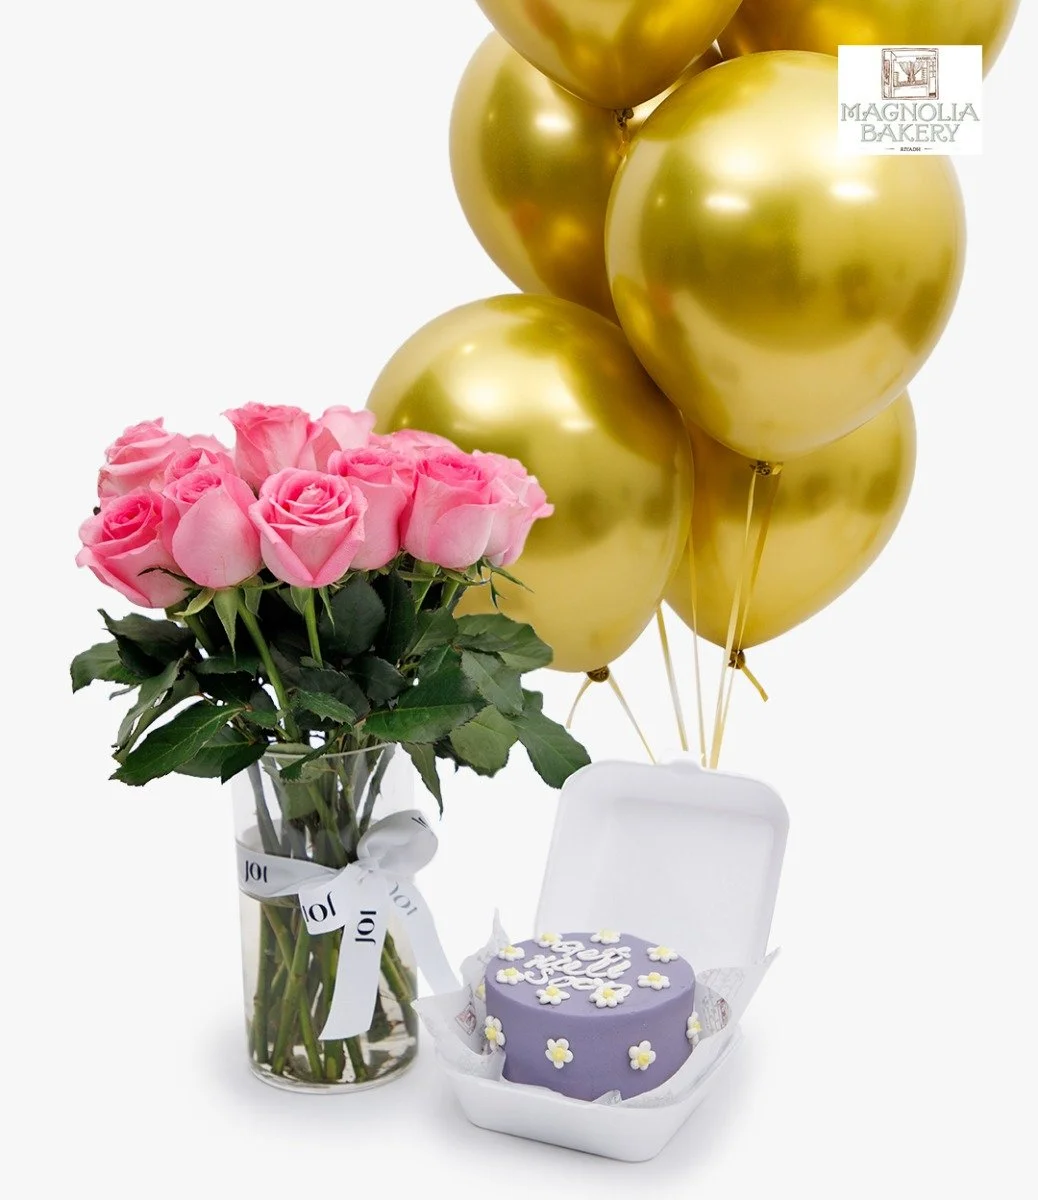 Get Well Soon Lunch Box Cake, Pink Roses Flowers And Balloons Bundle